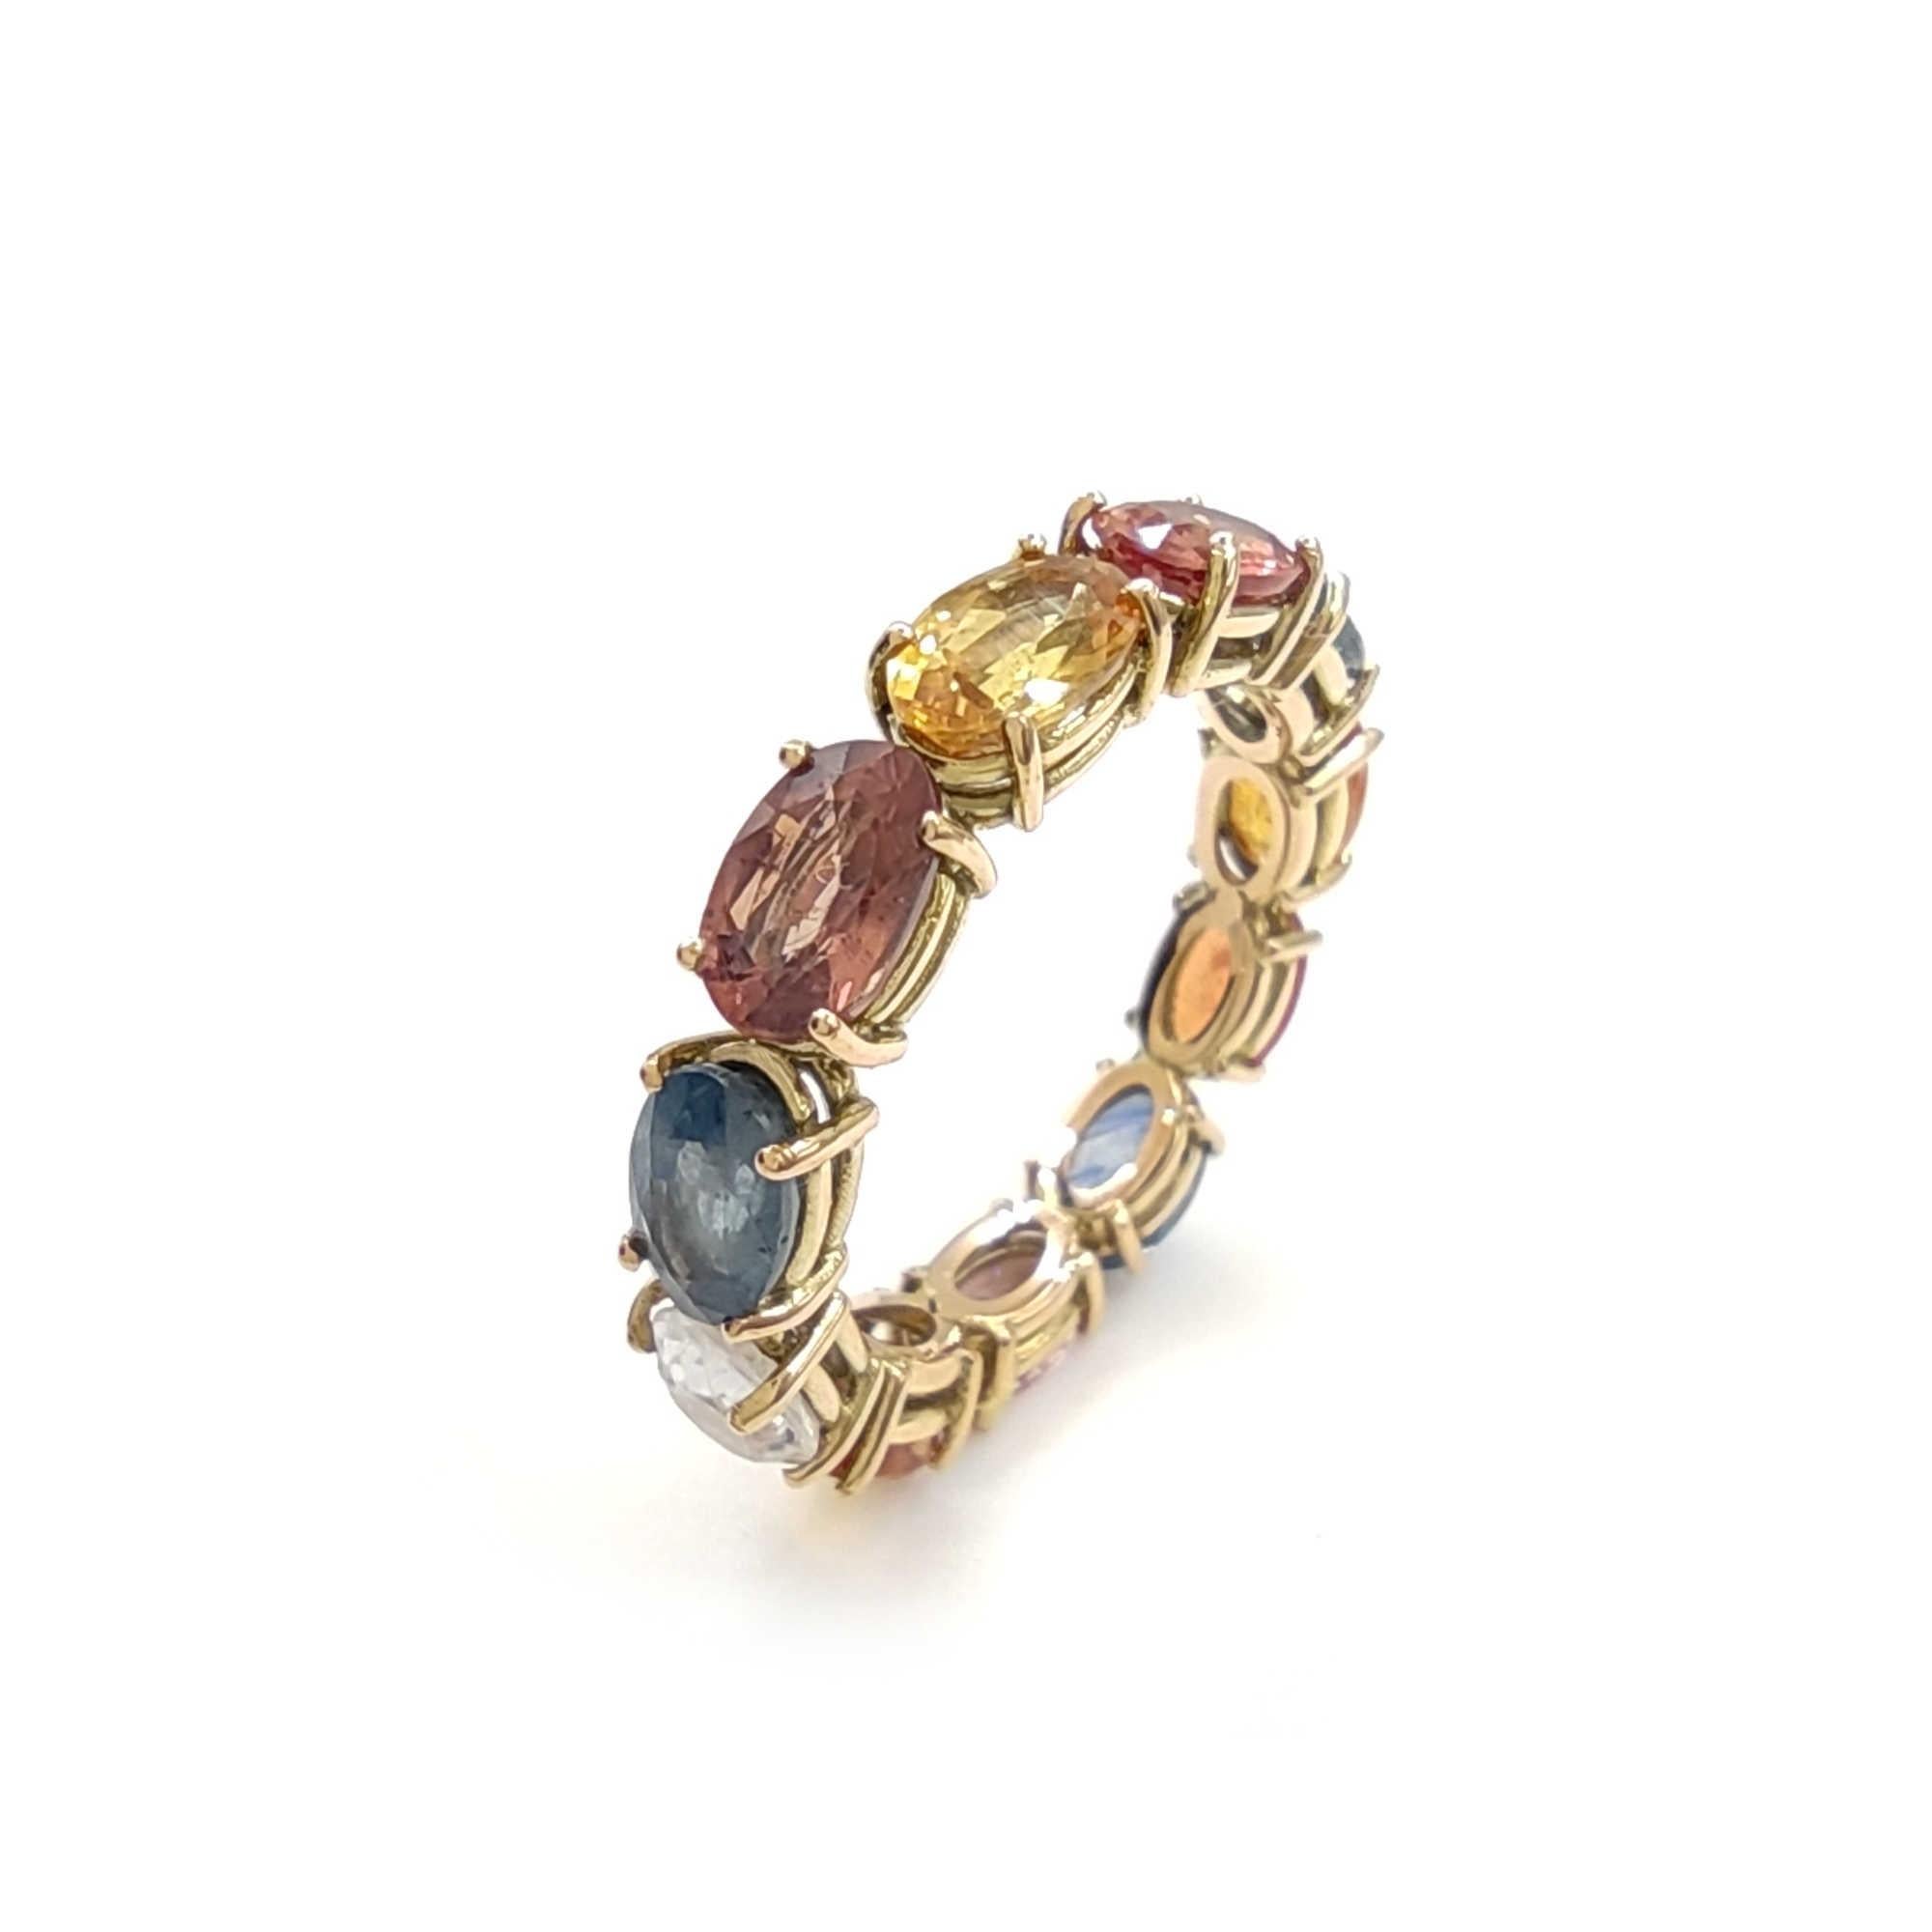 Contemporary Unique 14kt Yellow Gold Ring with Handcrafted Design & Sapphires - Shop Now For Sale